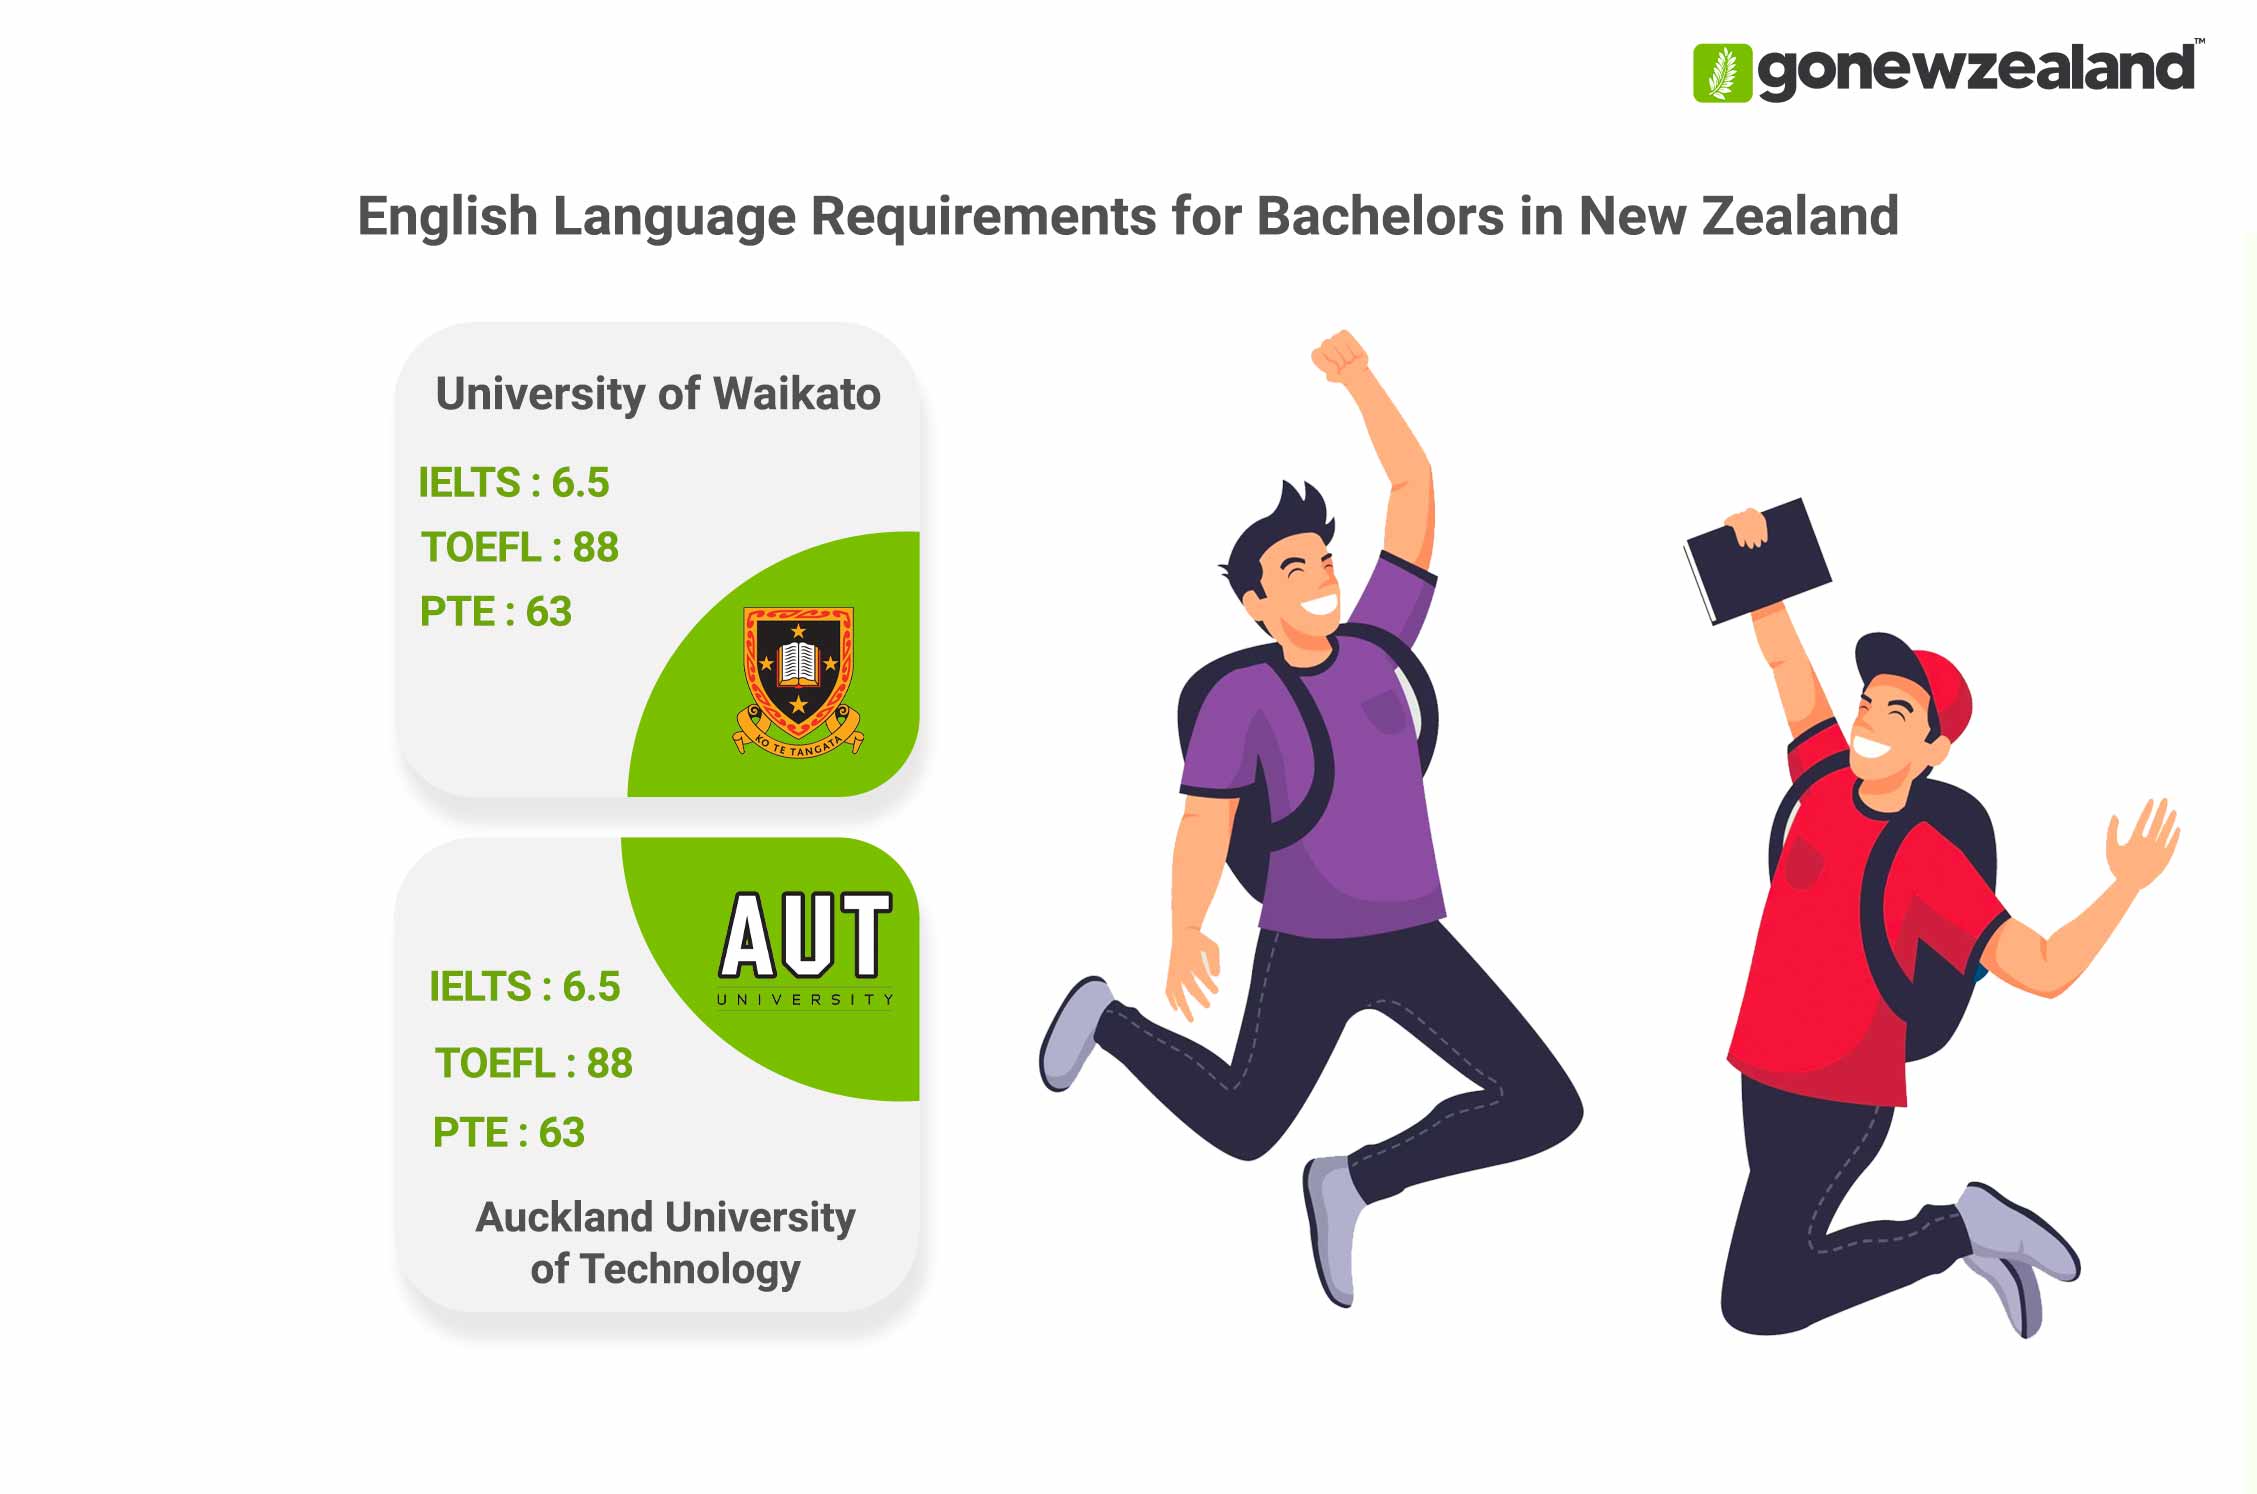 Bachelors in New Zealand English Language Requirements